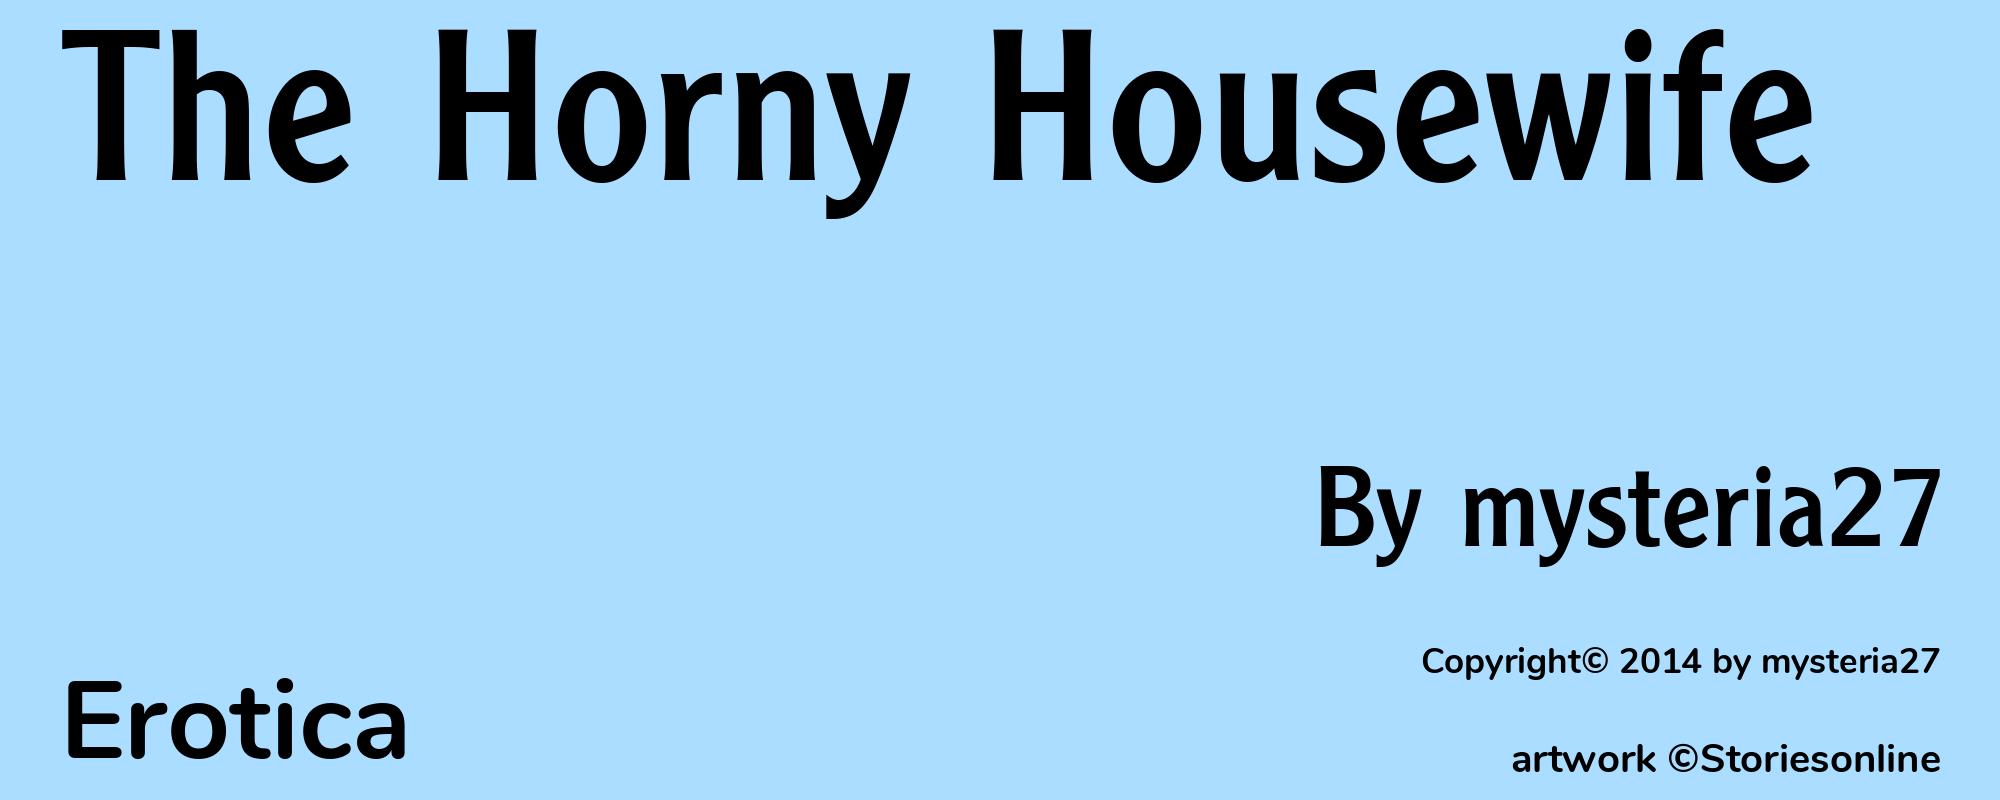 The Horny Housewife - Cover